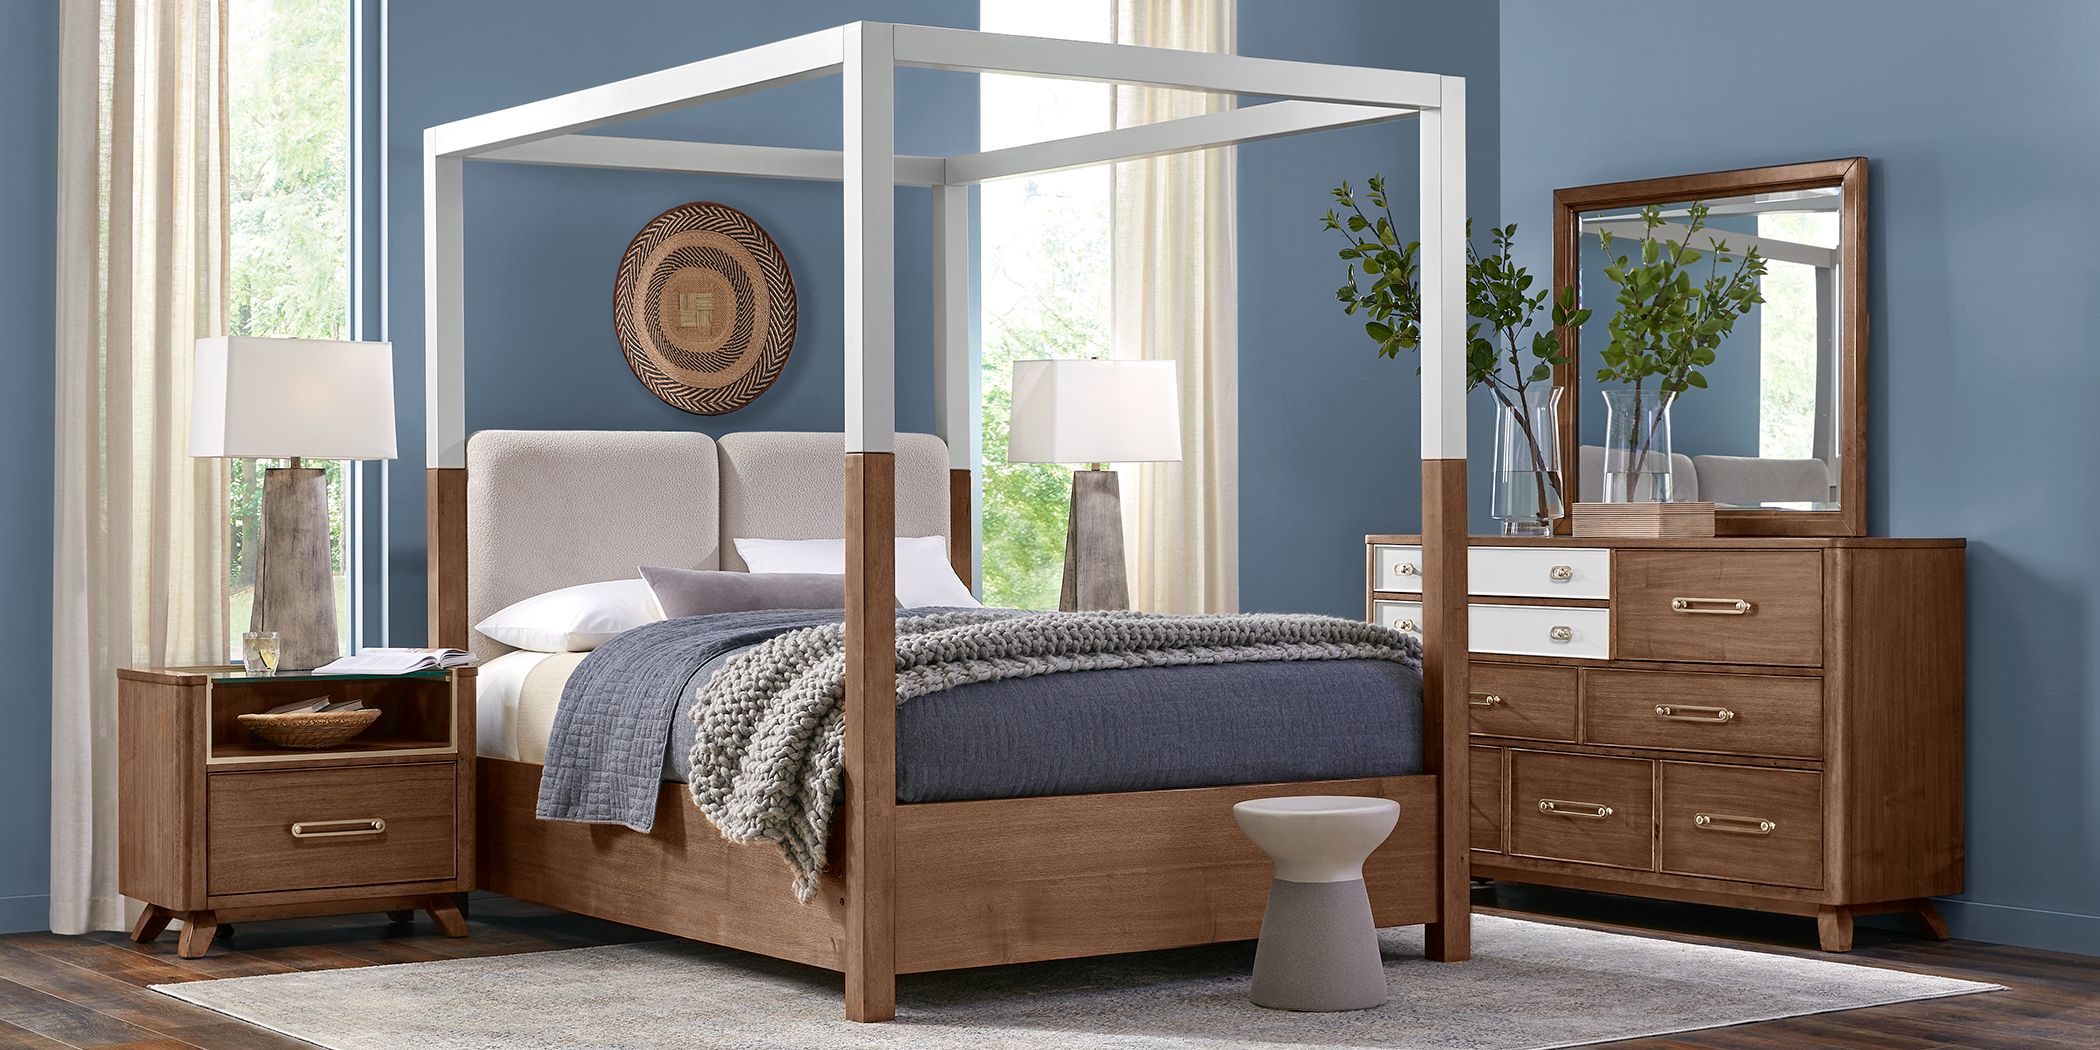 Prospect Heights Caramel 5 Pc King Canopy Bedroom